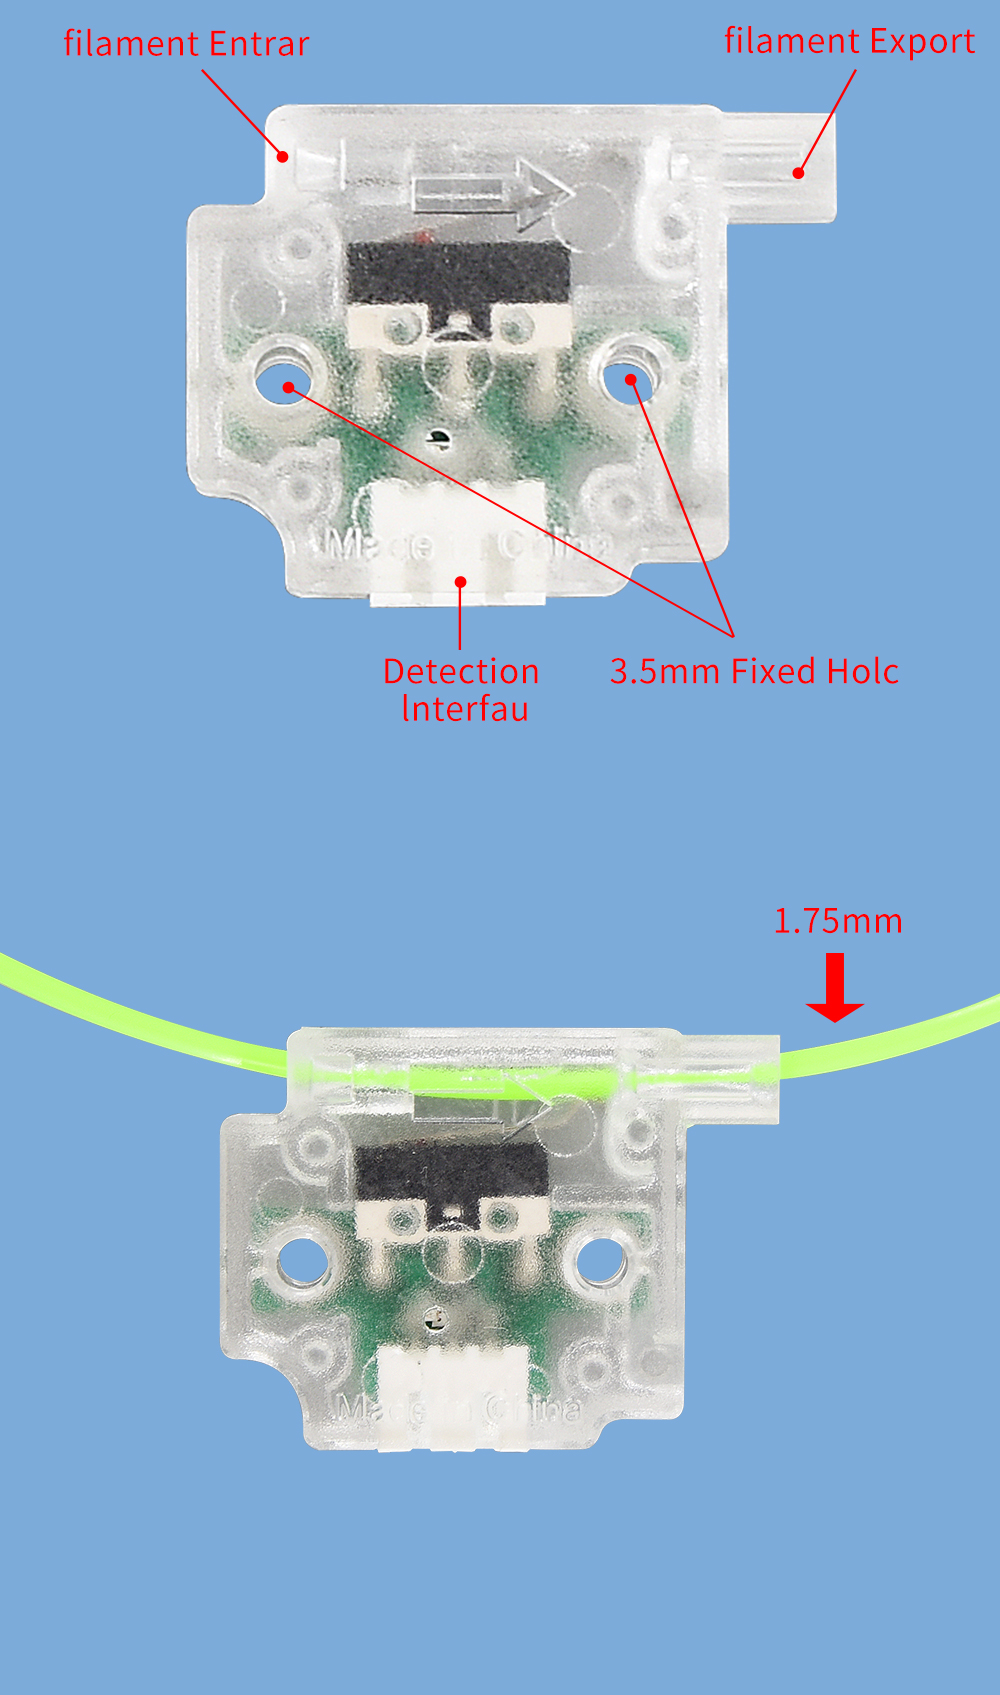 TWO TREES® Filament Break Detection Module With 1M Cable Run-out Sensor Material Runout Detector For Ender 3 CR10 3D Printer